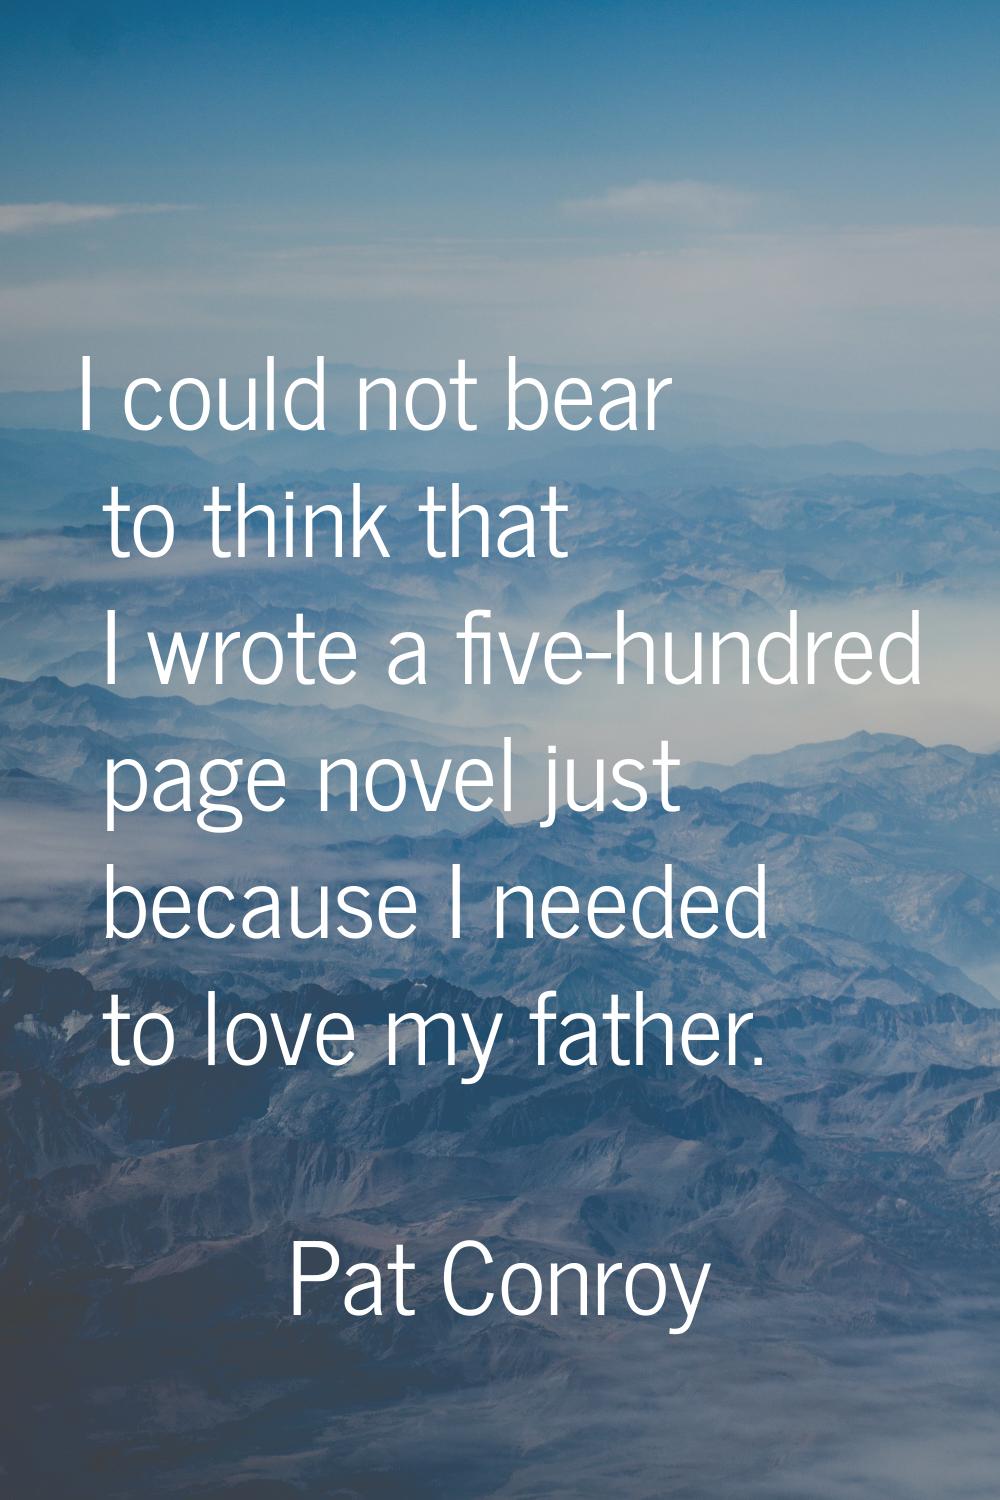 I could not bear to think that I wrote a five-hundred page novel just because I needed to love my f